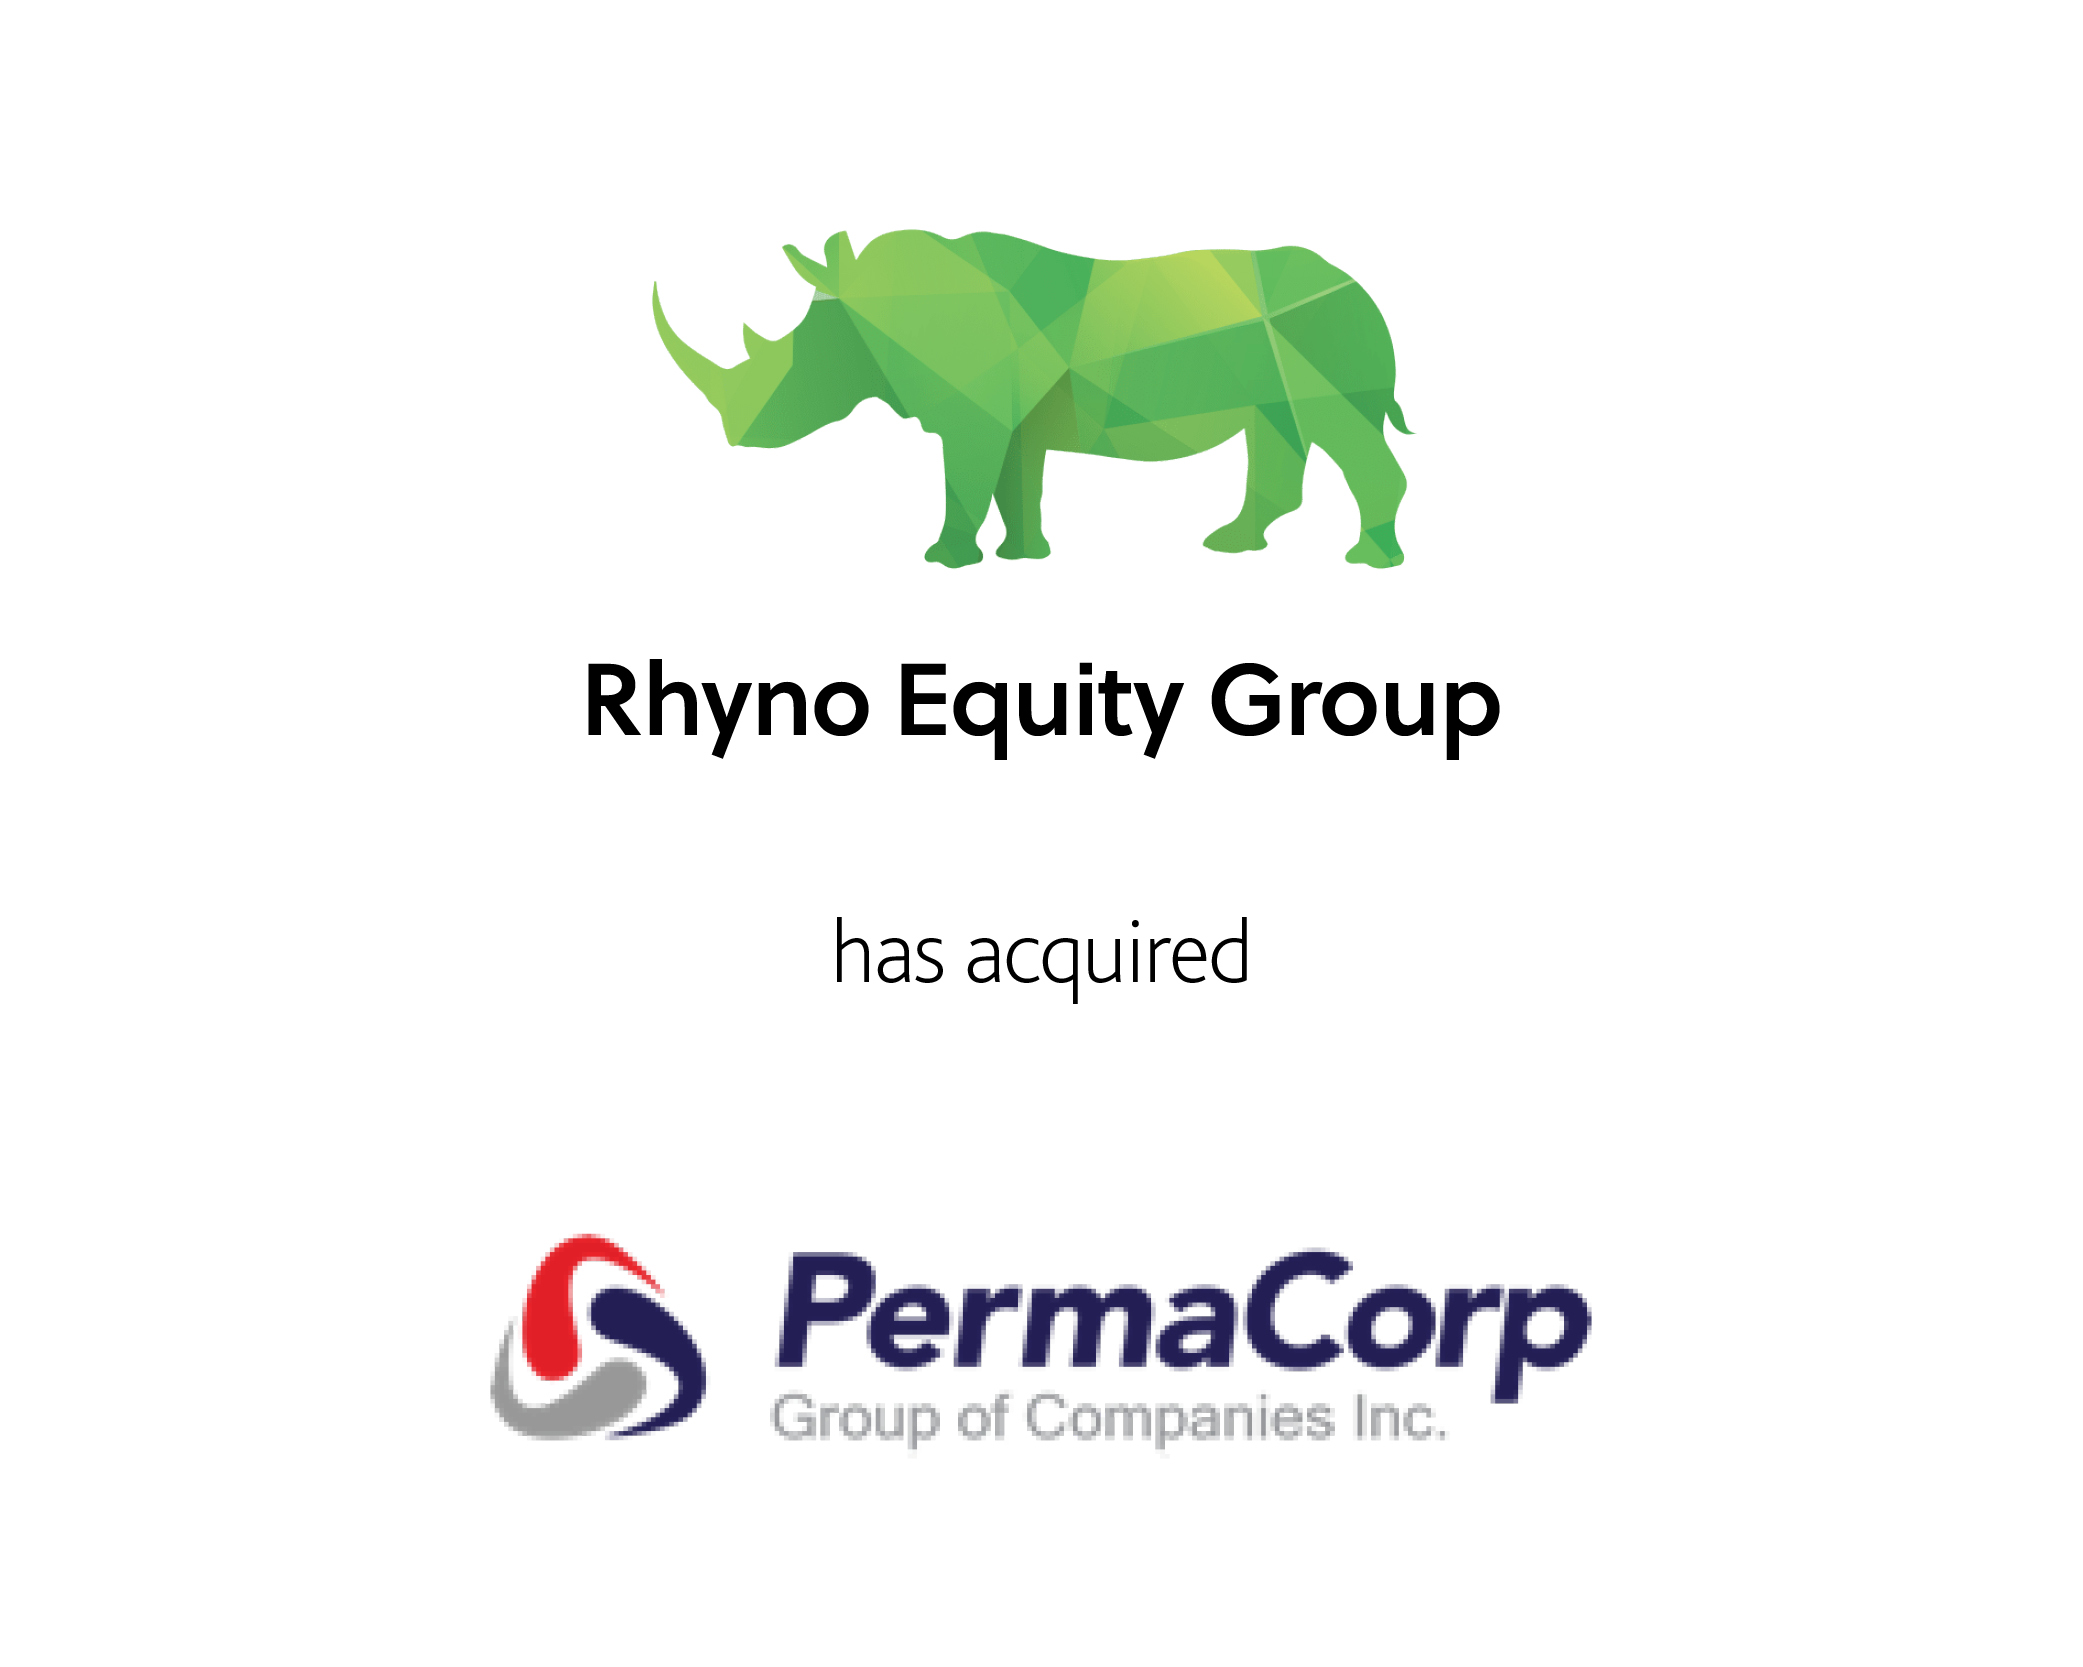 Rhyno Equity Group has acquired PermaCorp Group of Companies